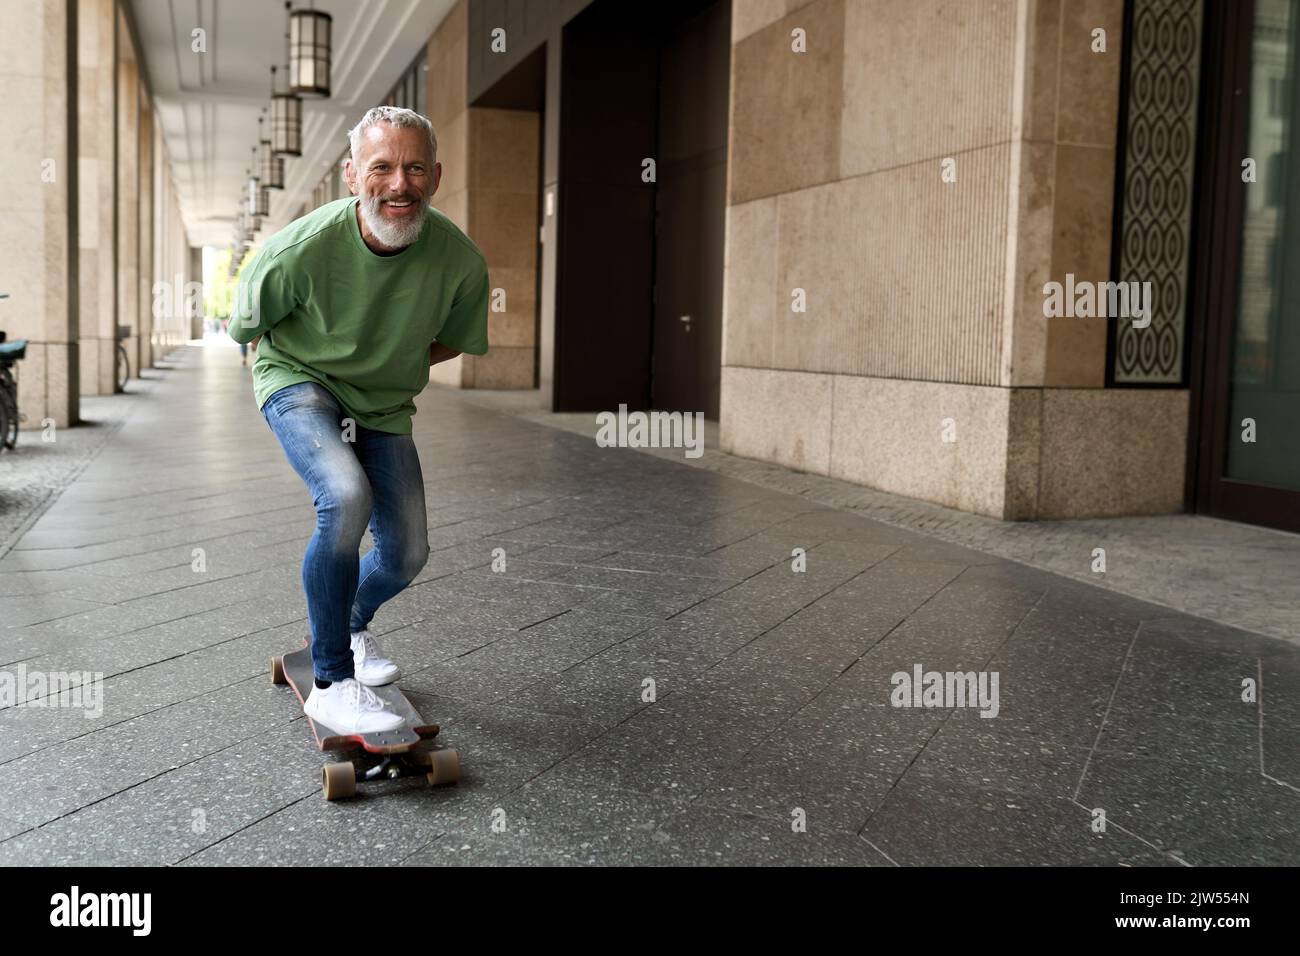 Active happy cool older man skater riding skateboard in the city street. Stock Photo